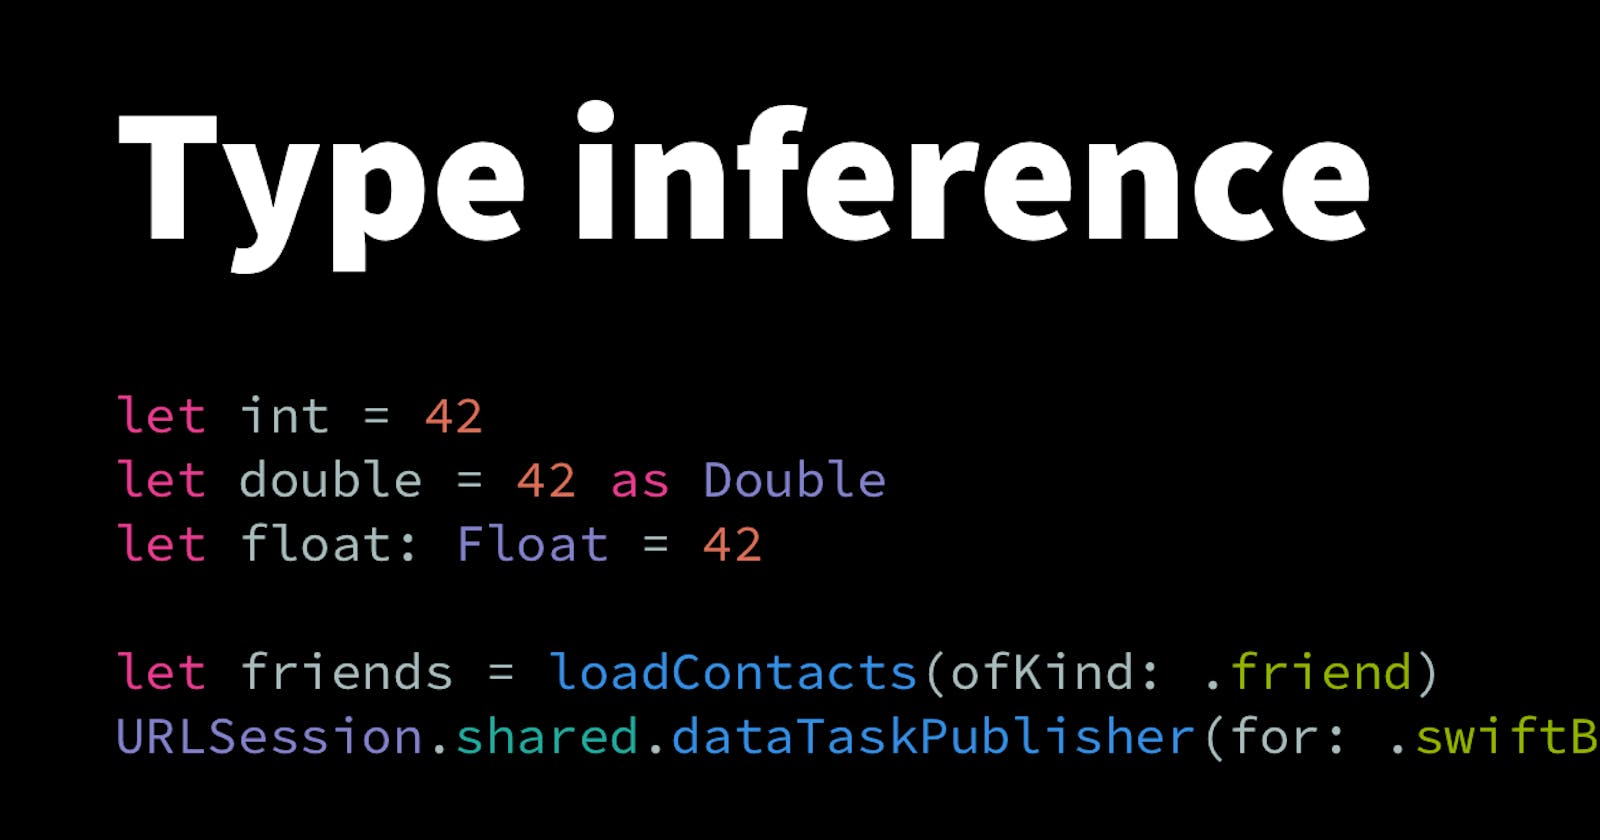 Type Inference: What It Is and How It Works